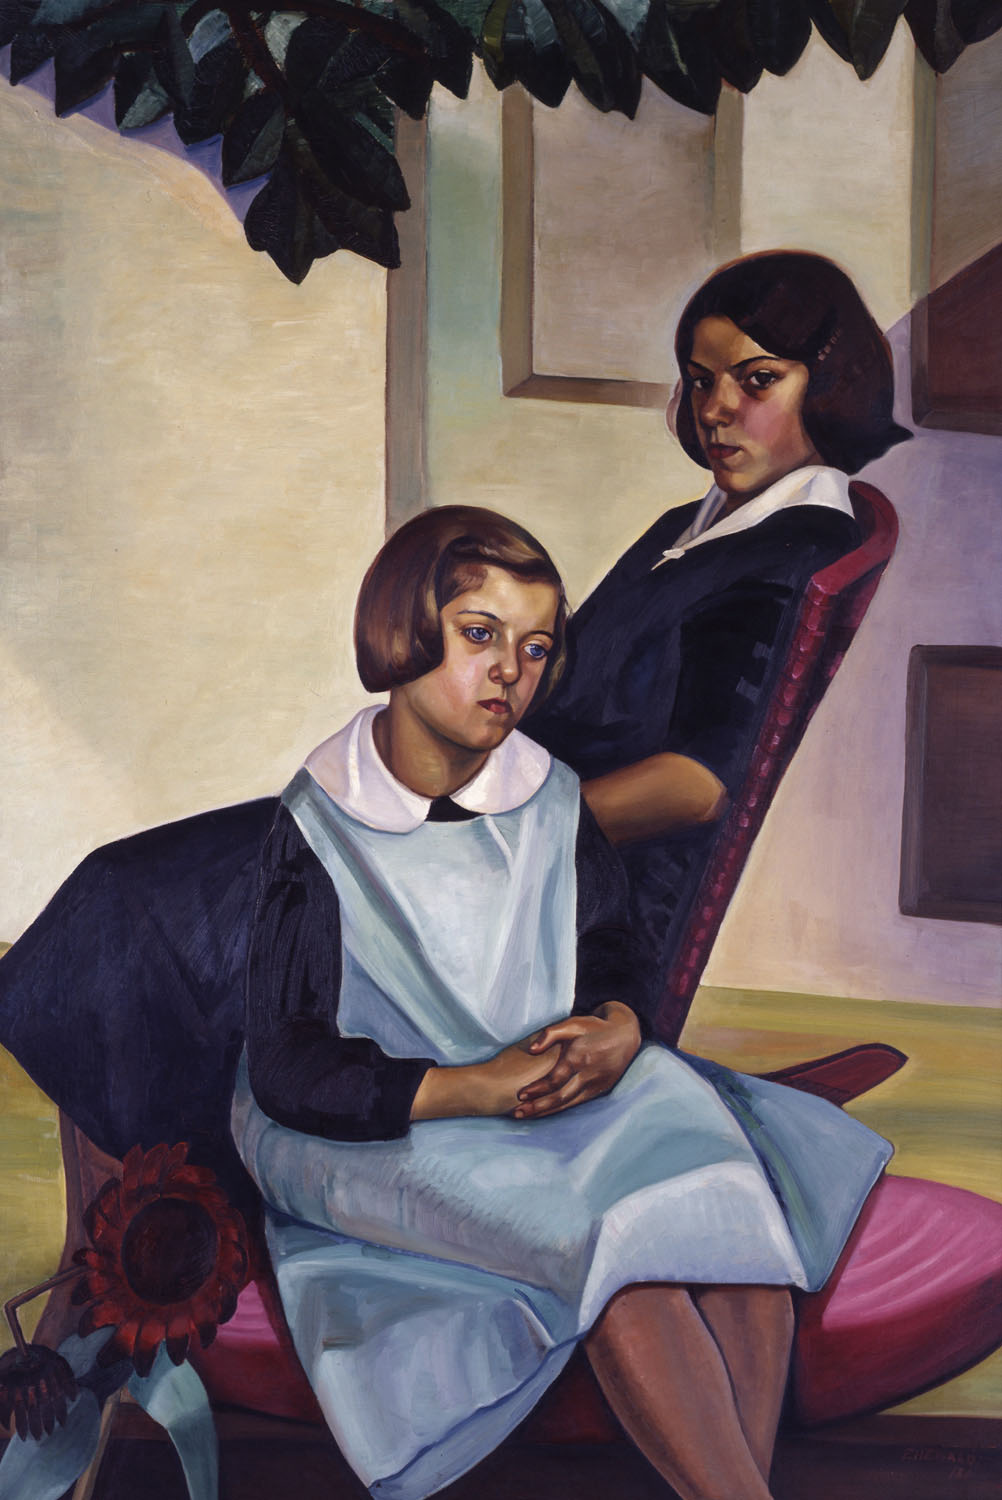 Two young girls sit on pink chairs, possibly on a patio, as the leaves of a plant or tree overhang them. The older girl sits facing left and looks directly at the viewer with a serious gaze. The younger girl sits in front and faces right, looking into the middle distance. They both wear blue pinafores with white collars.